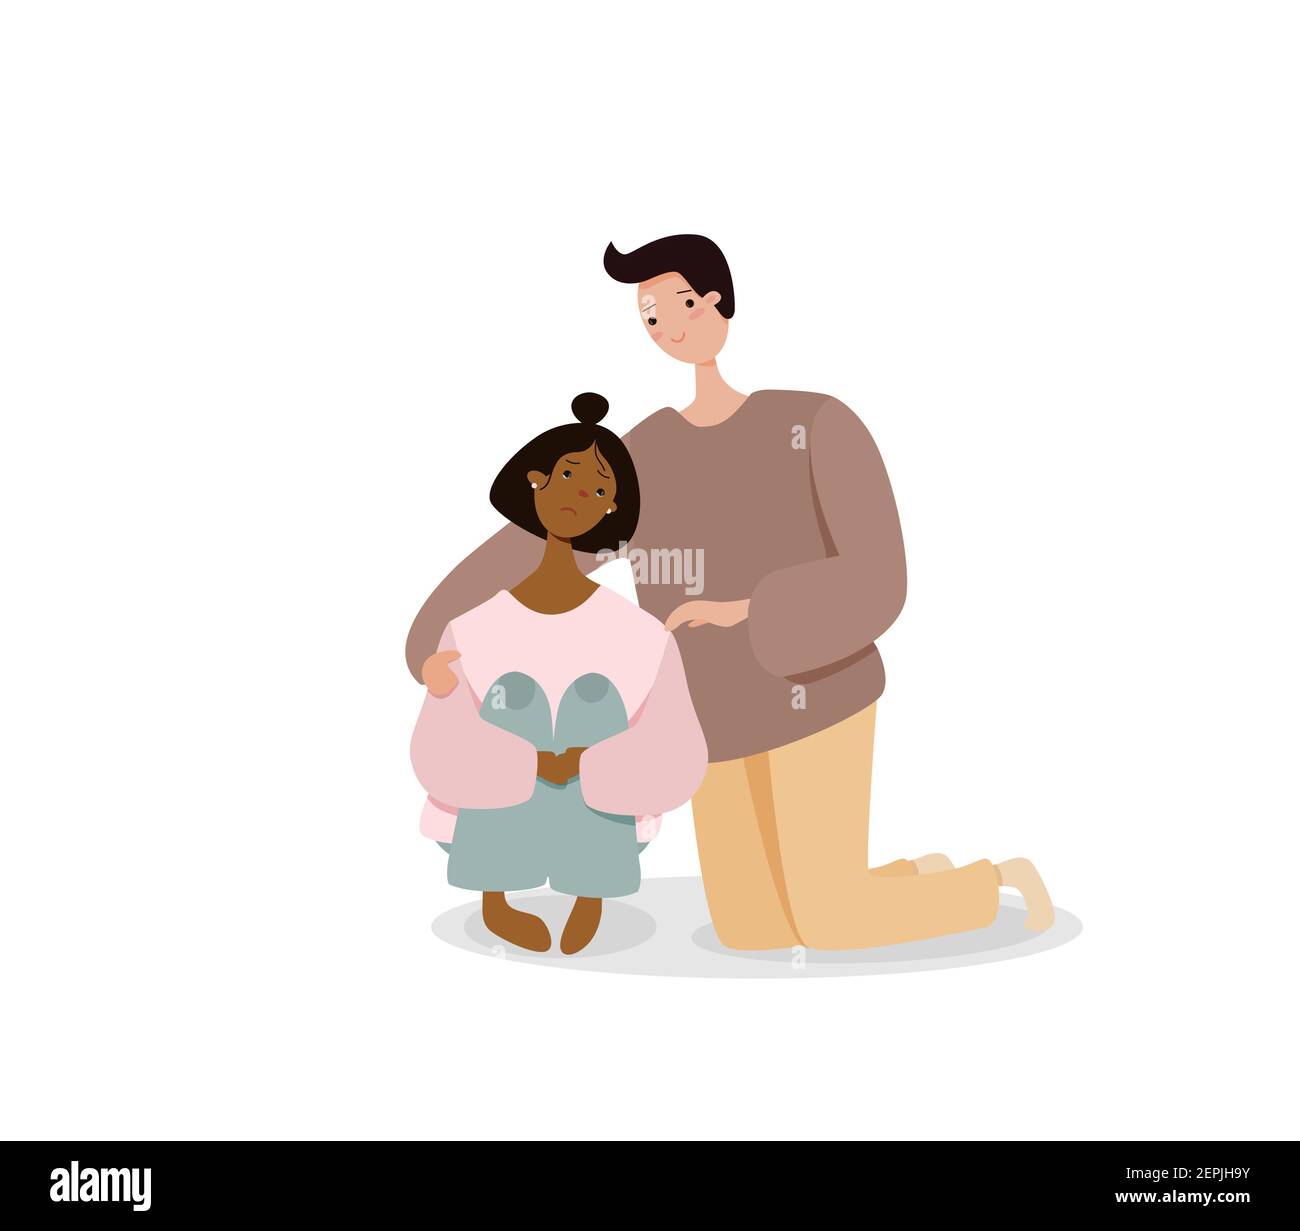 Woman calms her teenage daughter illustration. Female character gently hugs sad girl trying cheer her up. Stock Vector